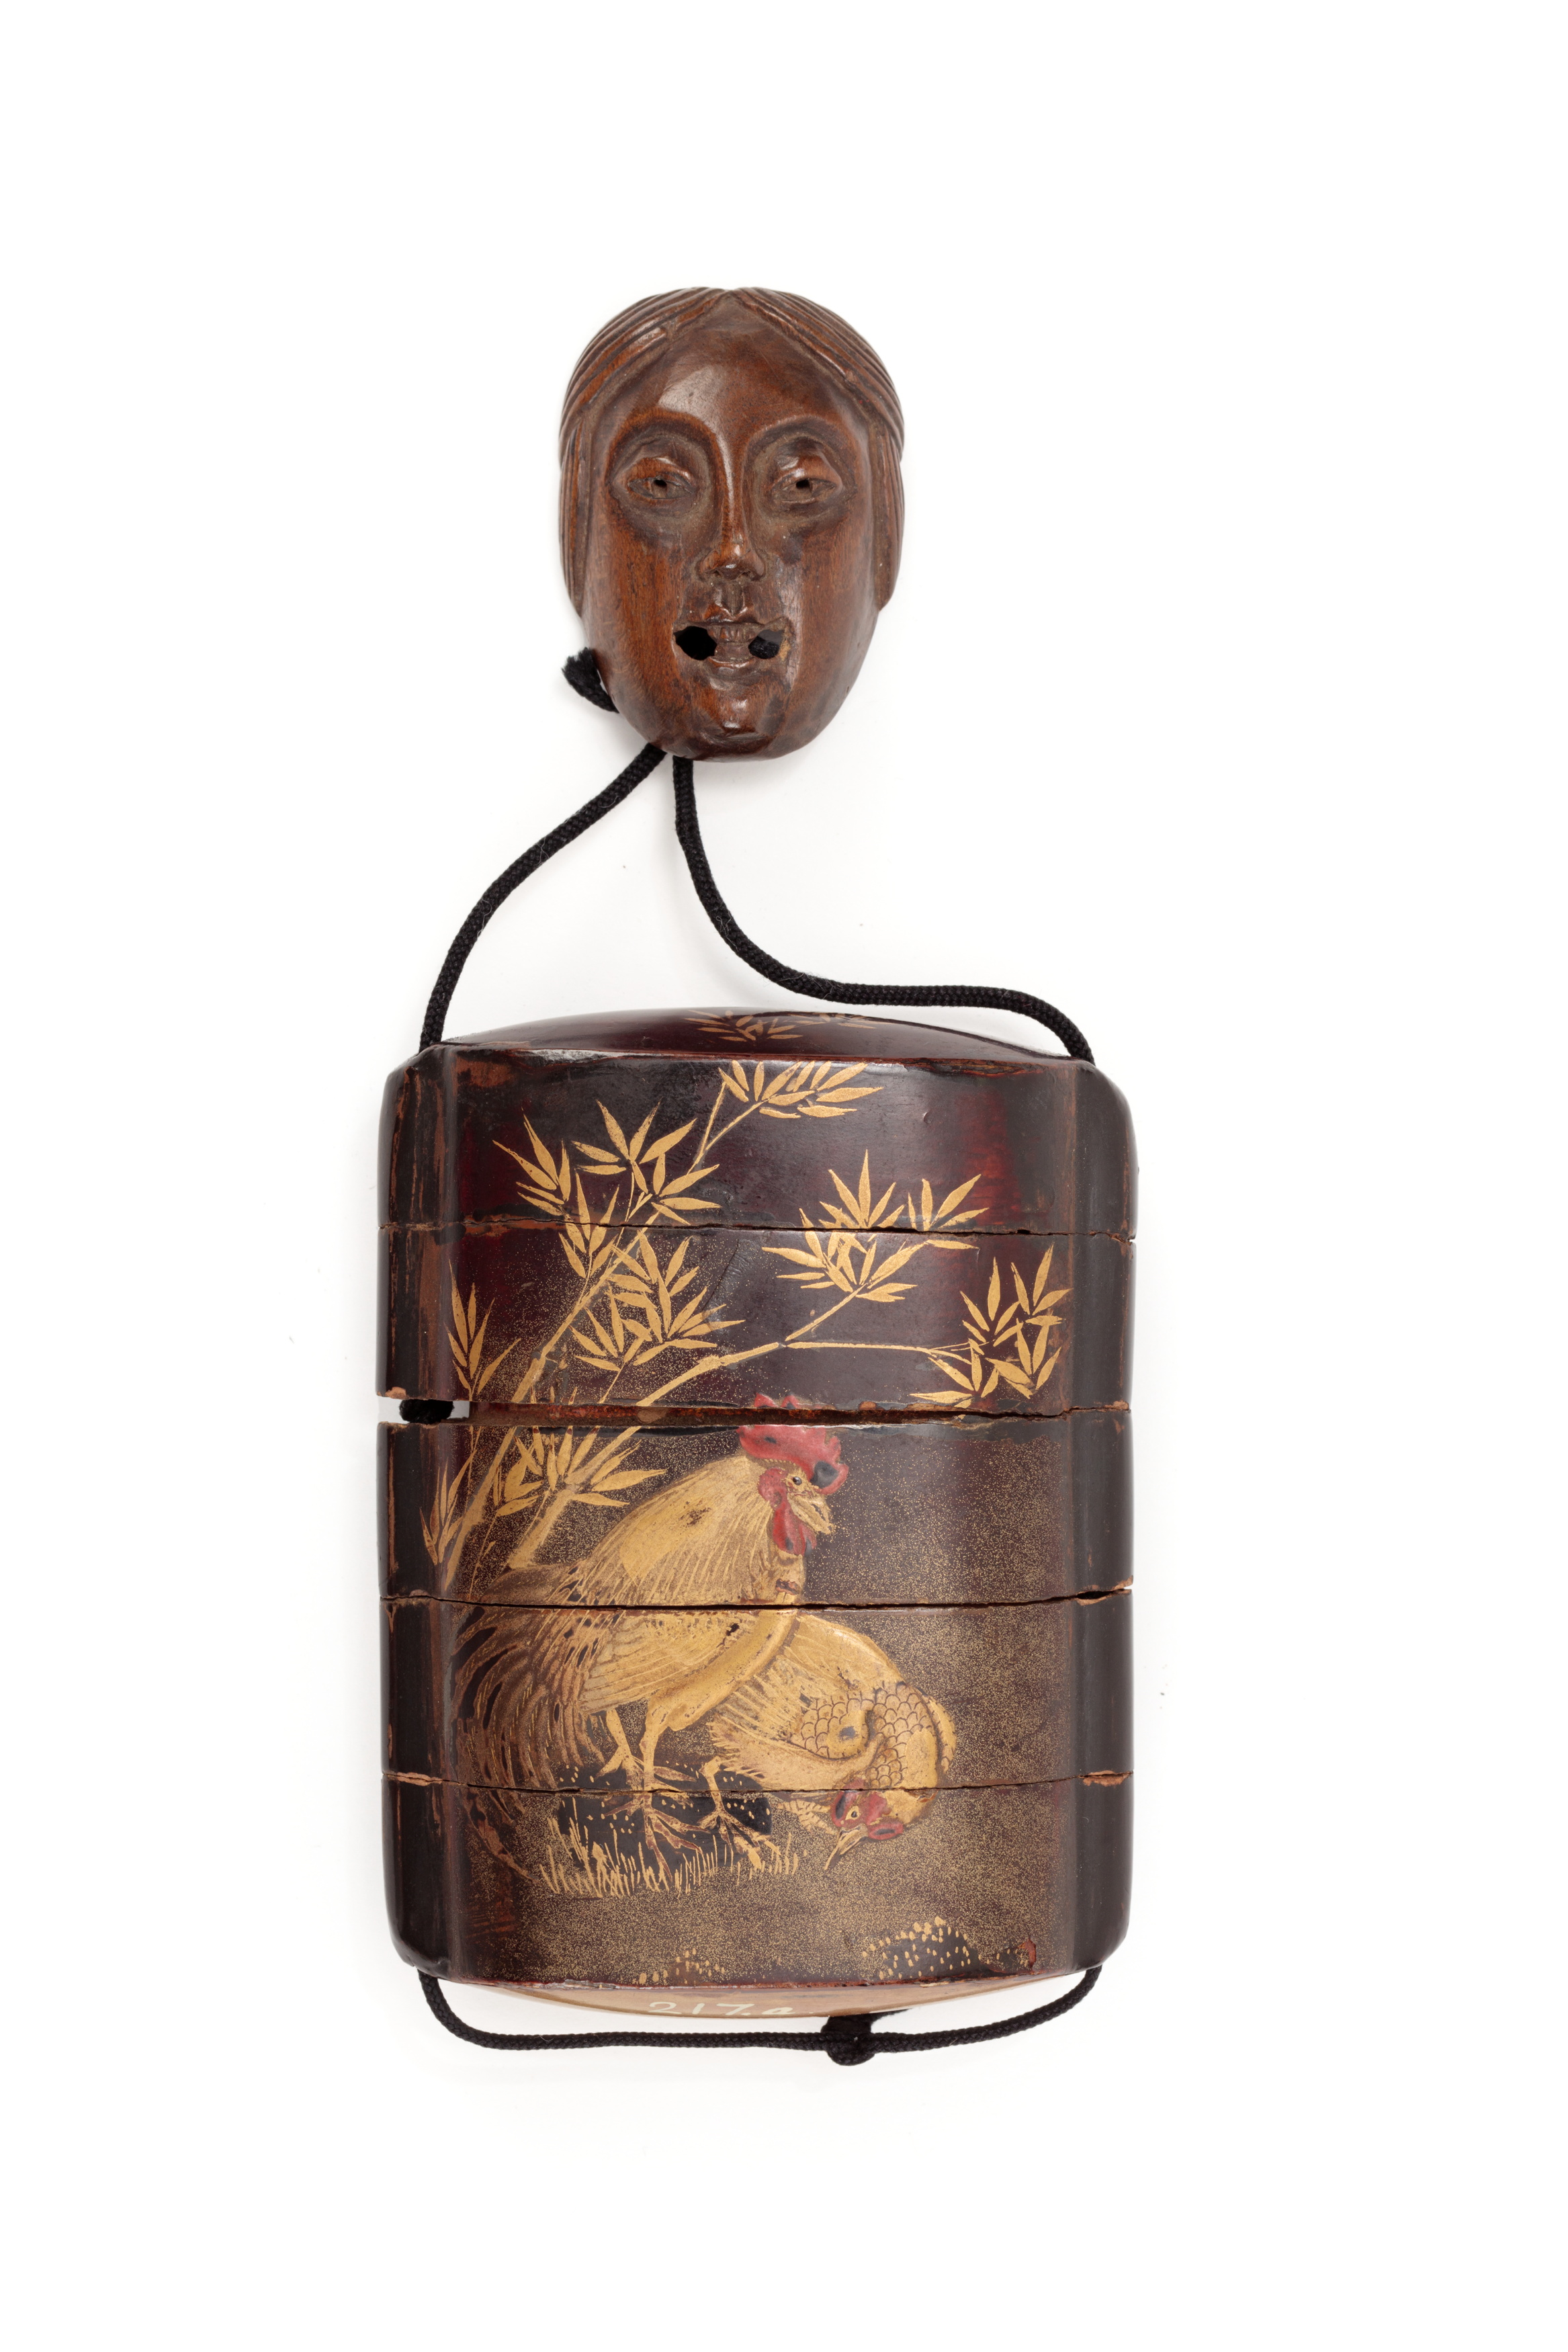 Inro and mask netsuke made from lacquered wood.